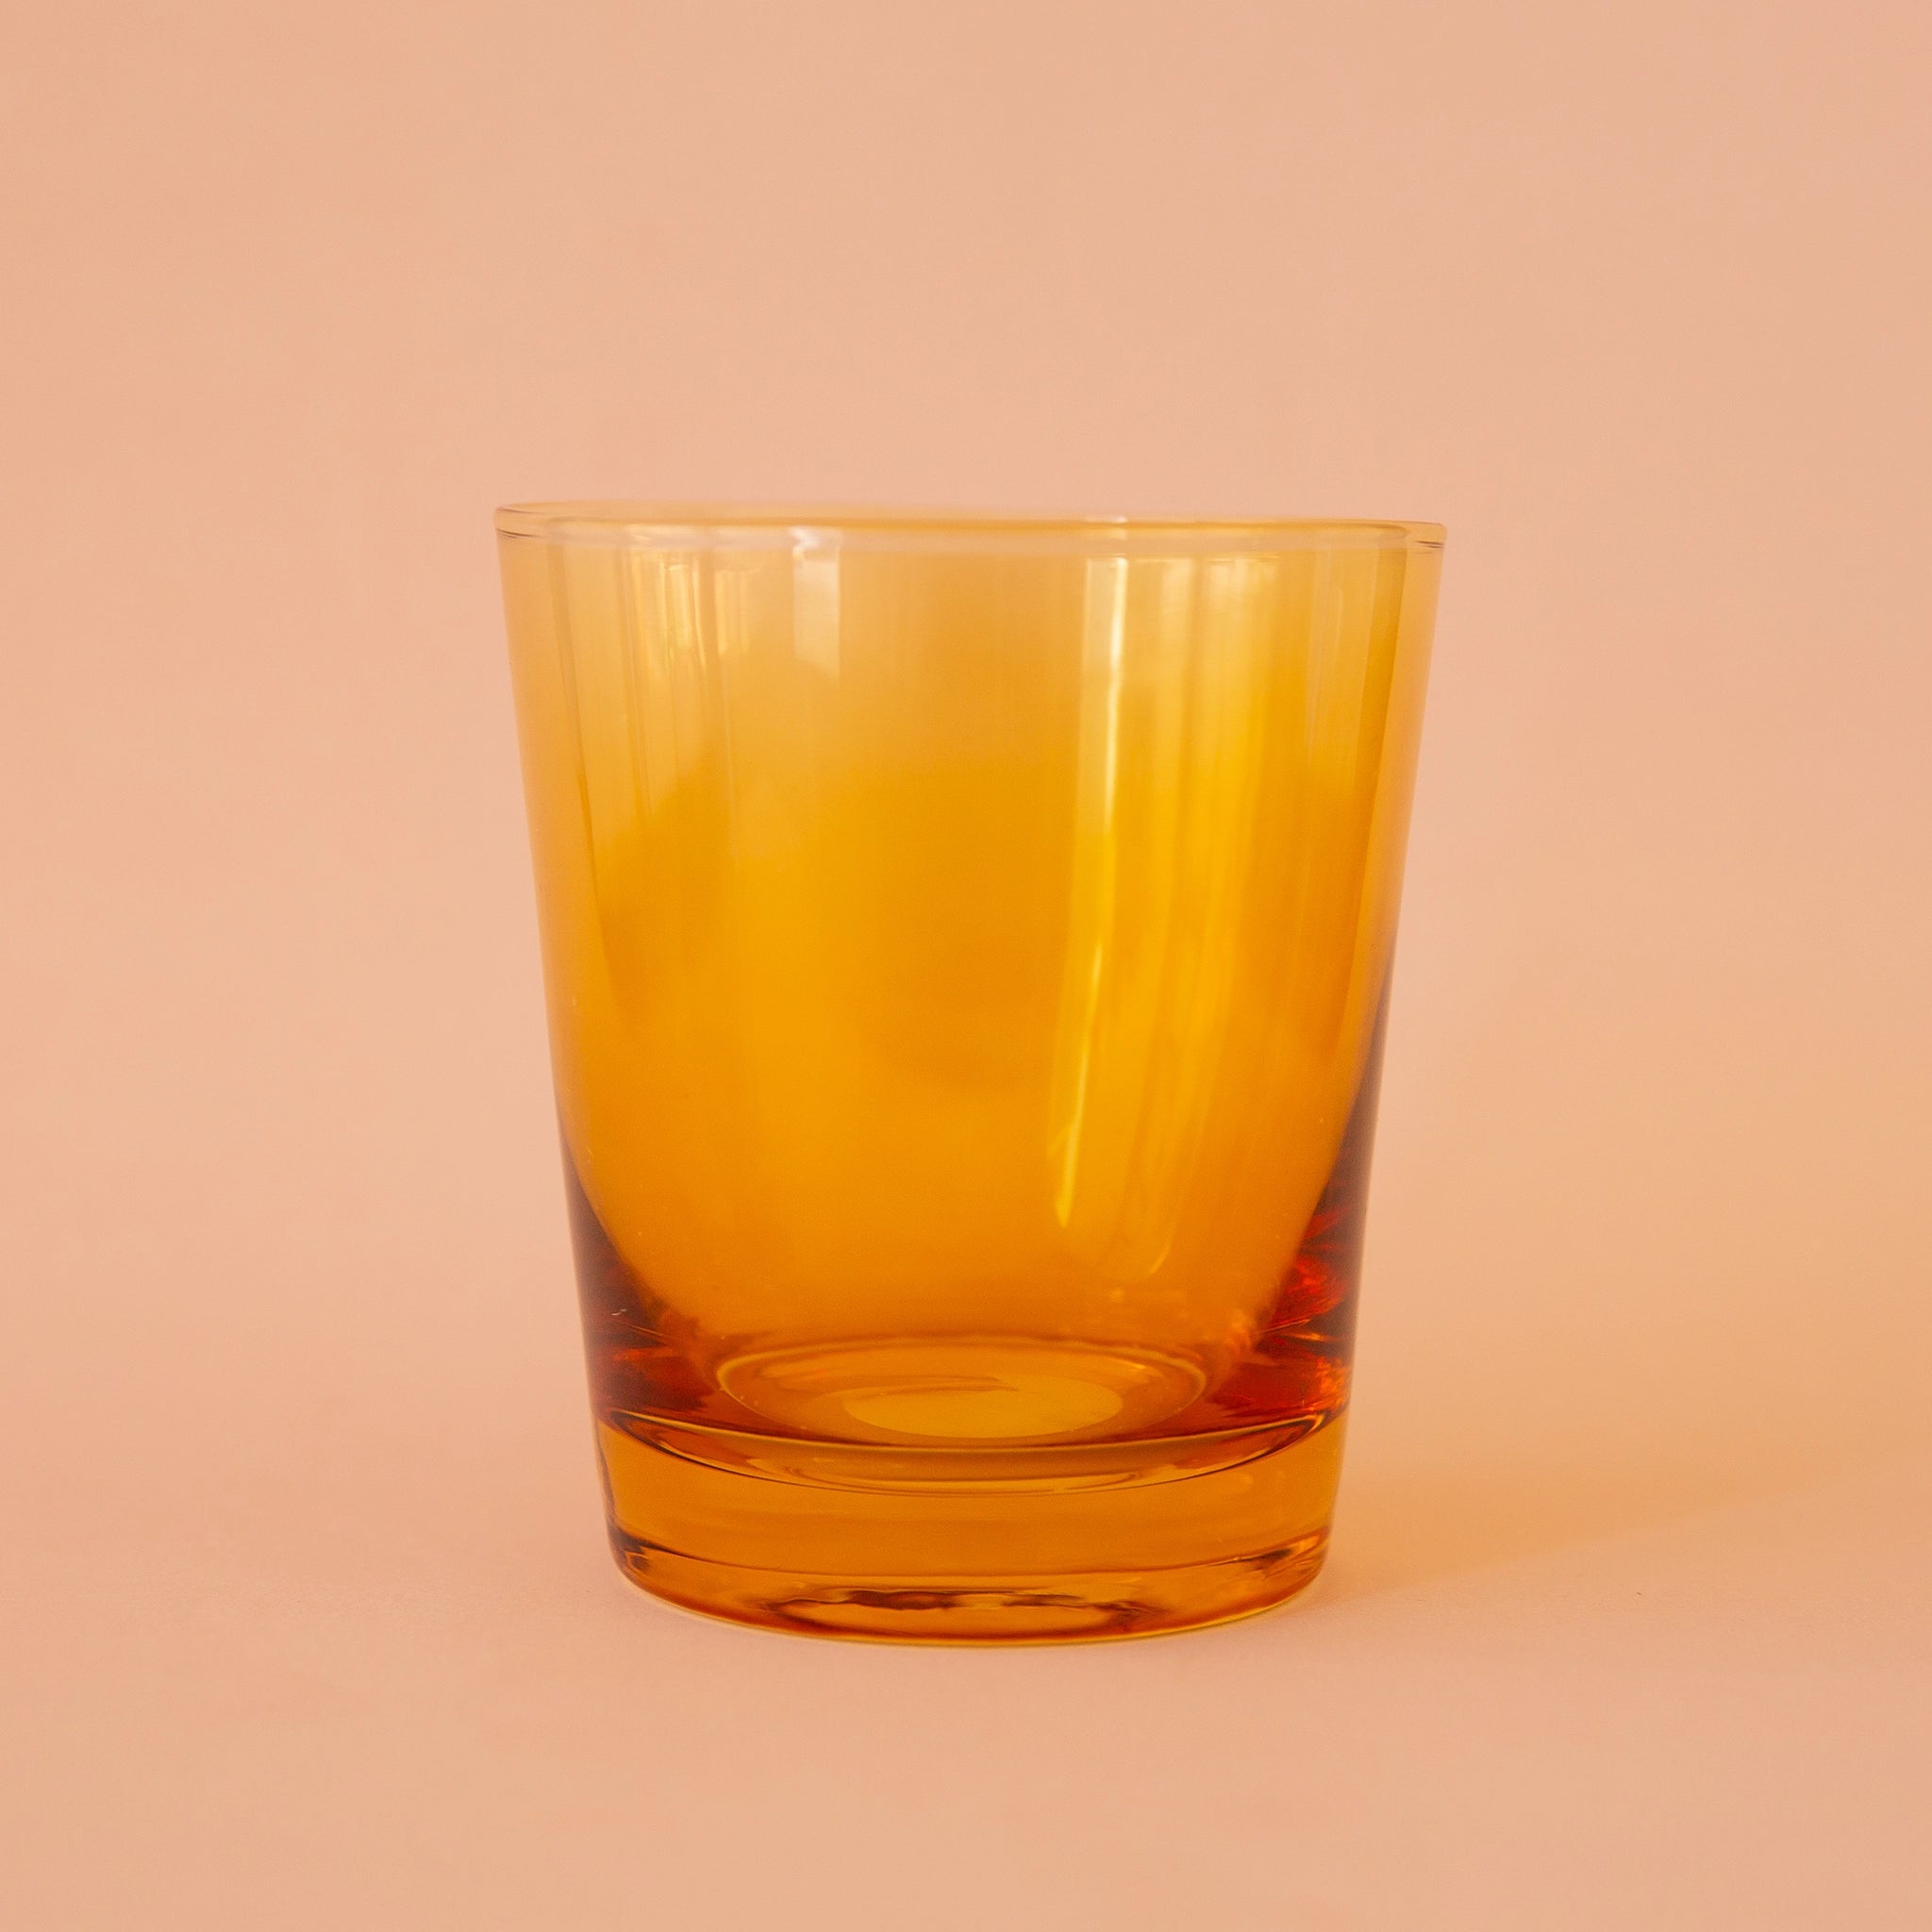 On a peachy background is a short yellow drinking glass. 